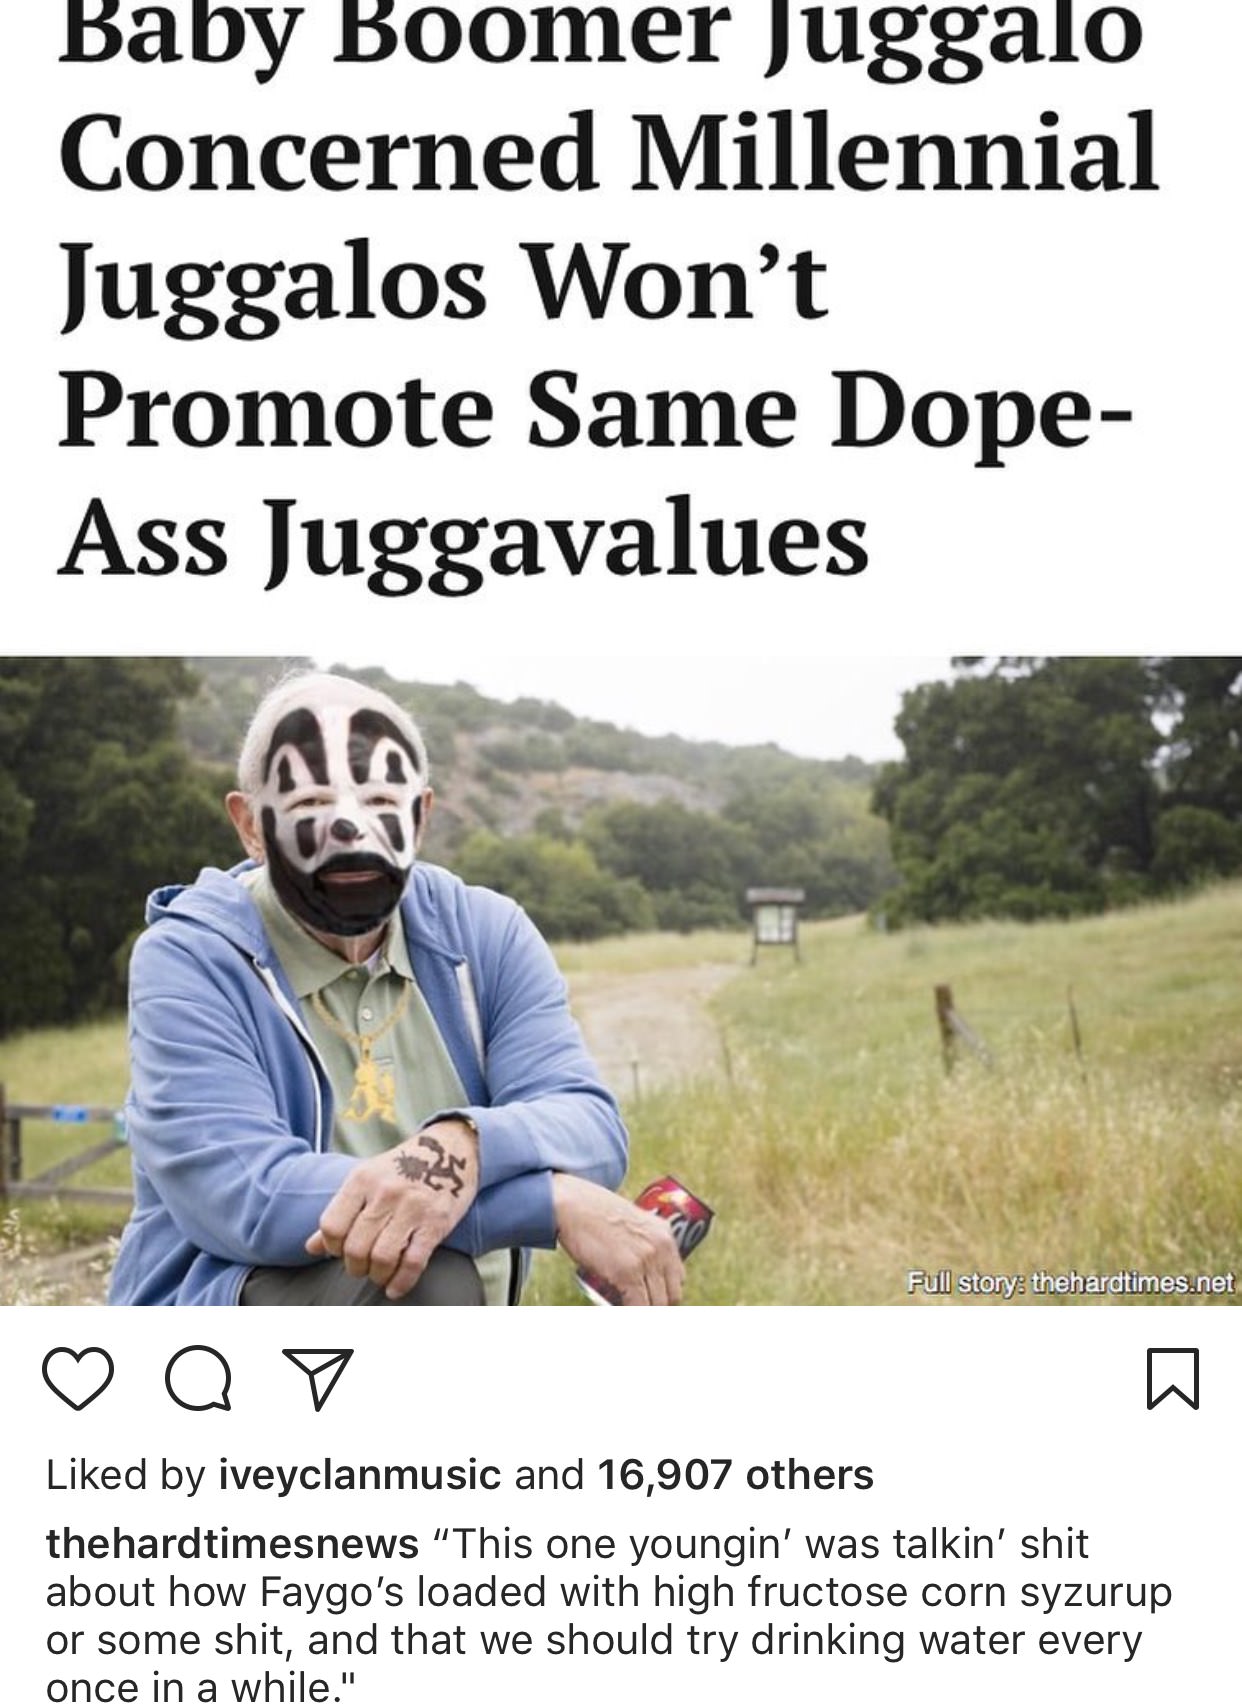 baby boomer juggalo - Baby Boomer Juggalo Concerned Millennial Juggalos Won't Promote Same Dope Ass Juggavalues Full story thehardtimes.net oo d by iveyclanmusic and 16,907 others thehardtimesnews